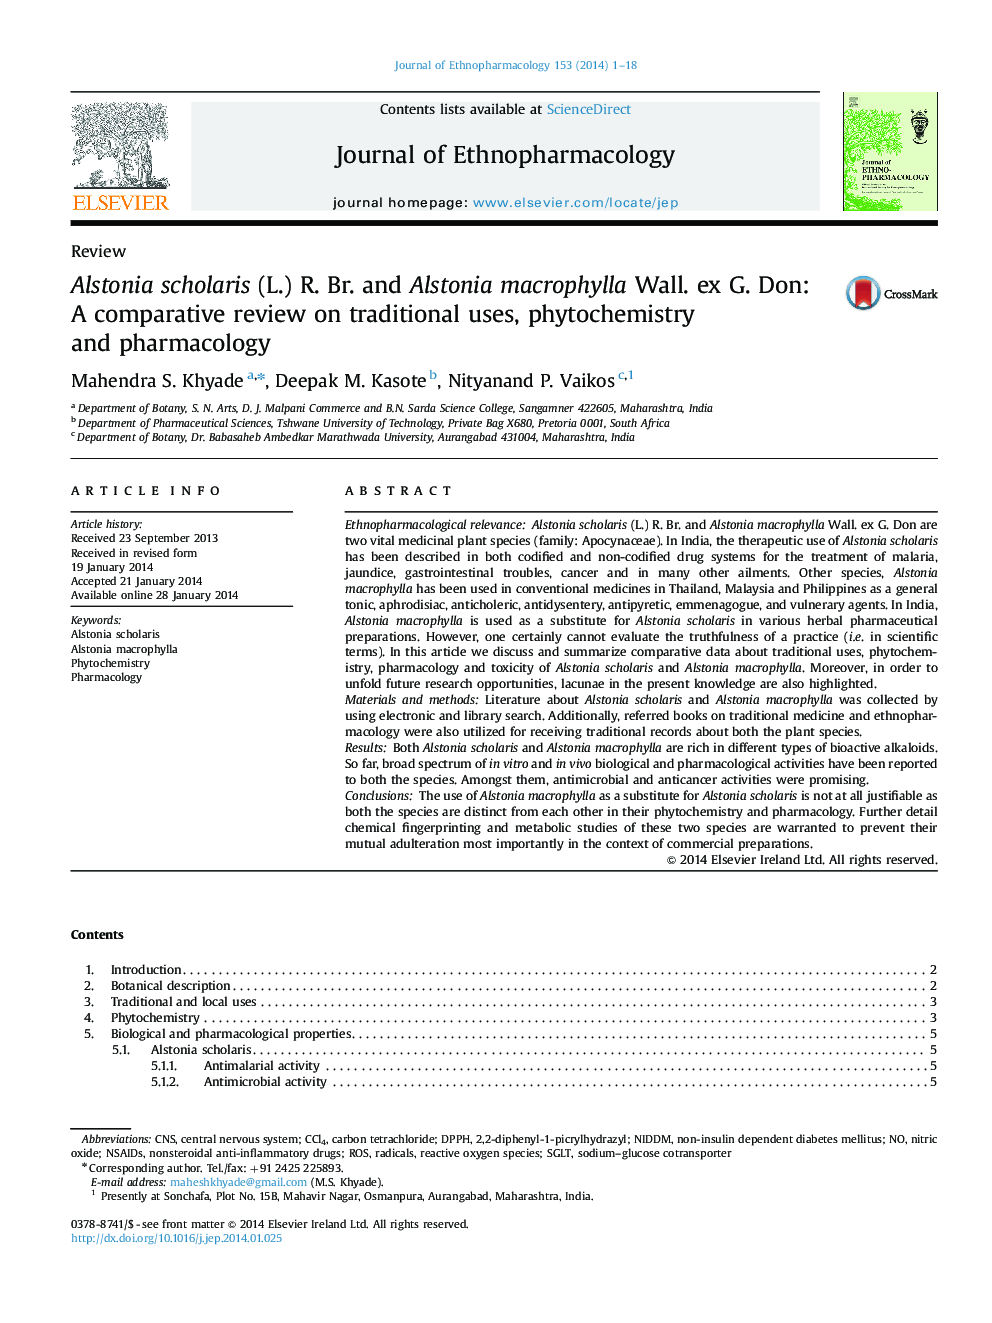 Alstonia scholaris (L.) R. Br. and Alstonia macrophylla Wall. ex G. Don: A comparative review on traditional uses, phytochemistry and pharmacology